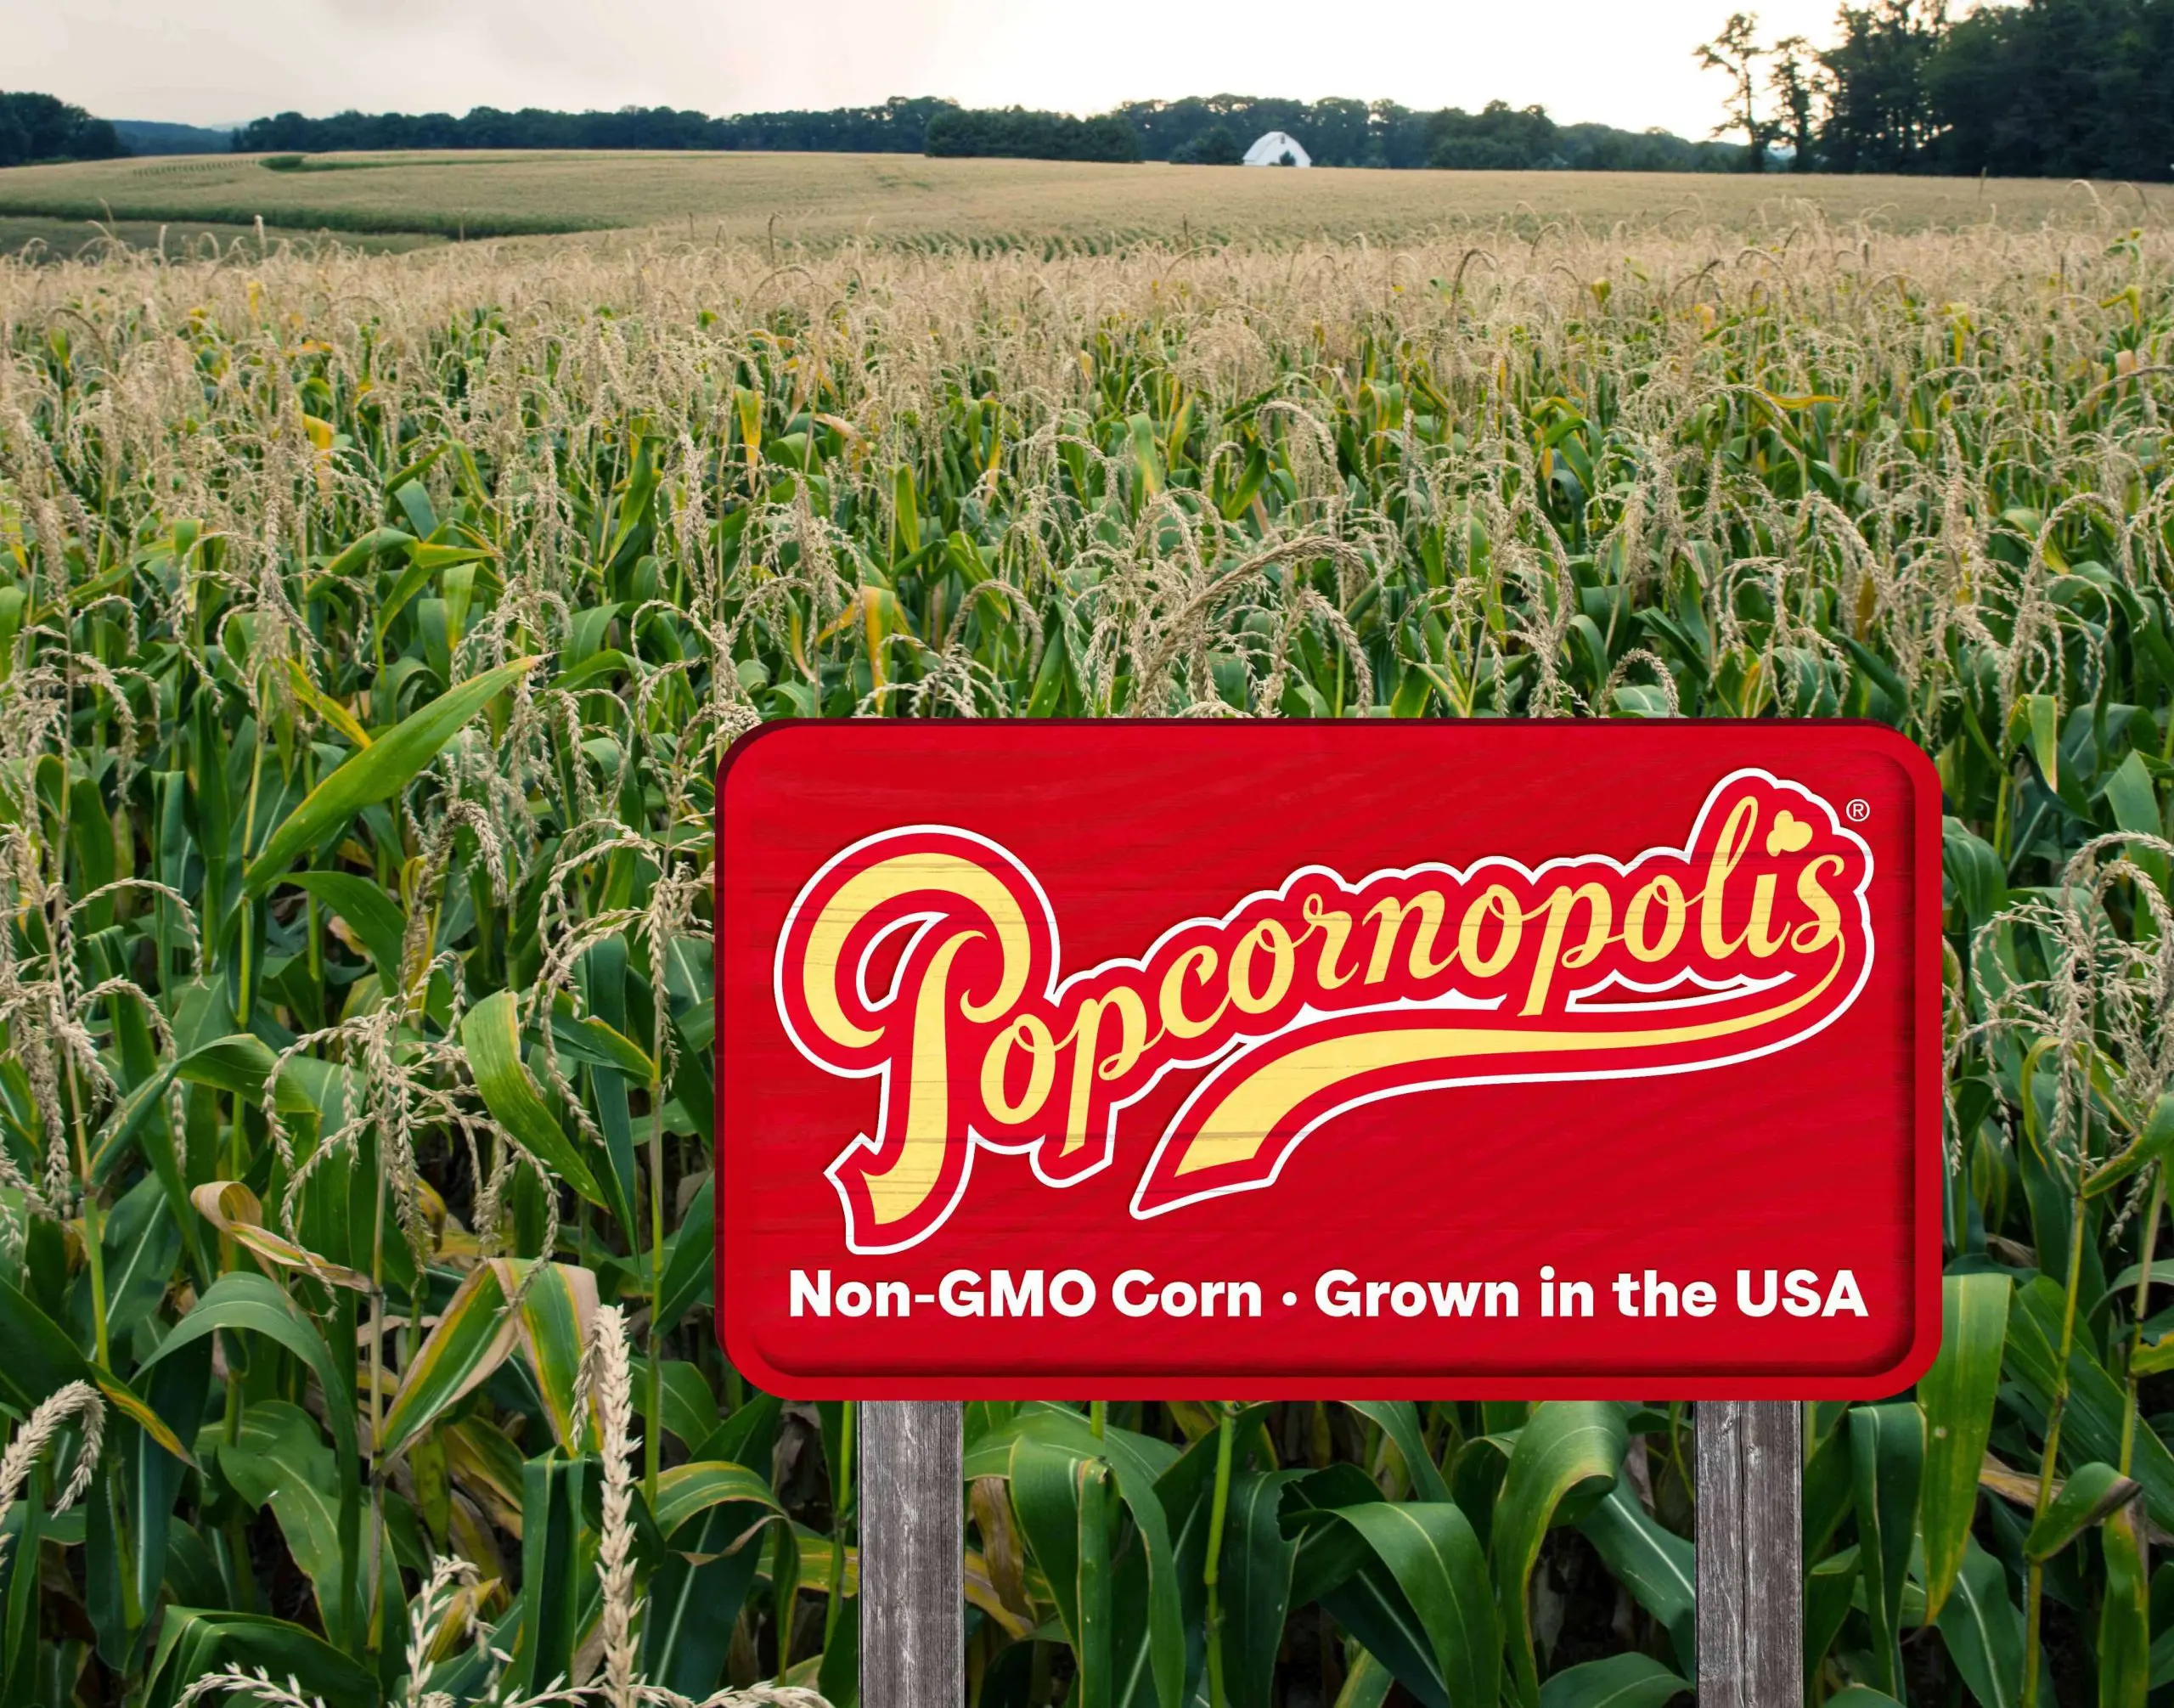 A pictured a corn field with a posted sign with red background in yellow writing with the word Popcornopolis. In small white lettering 